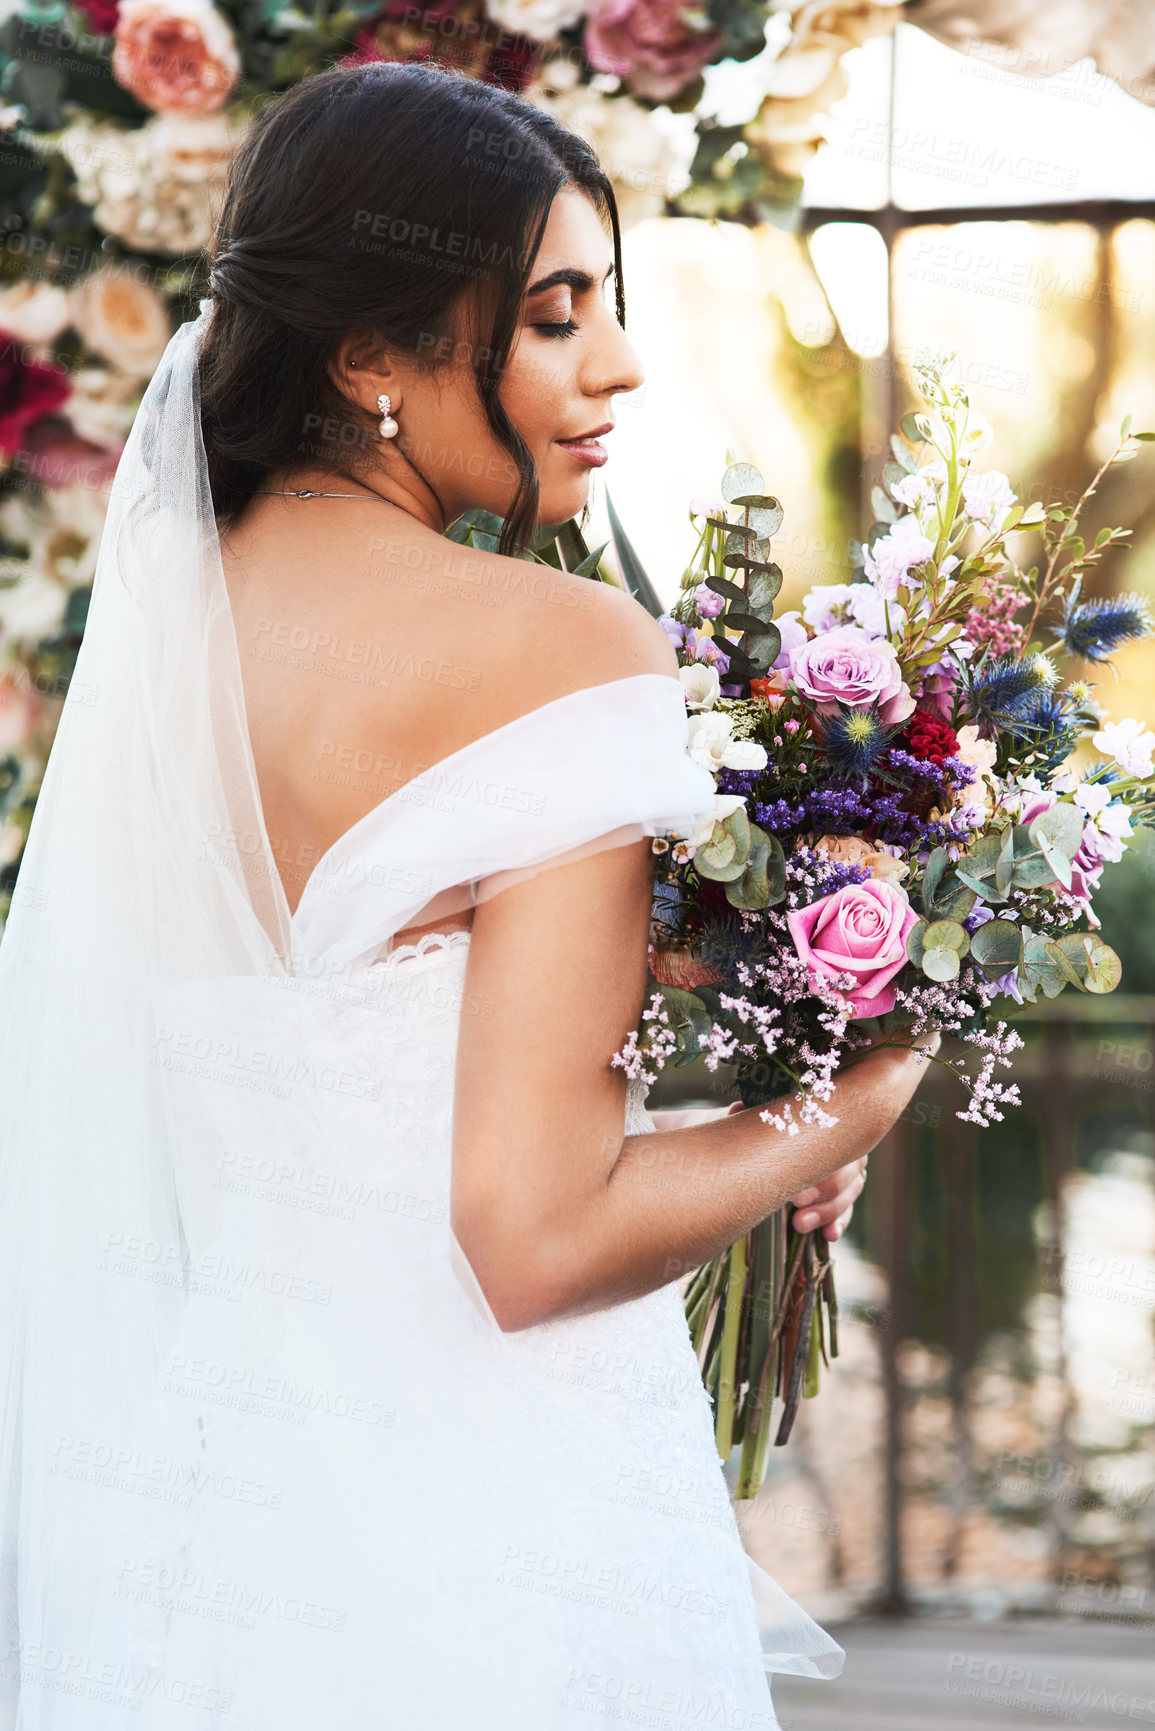 Buy stock photo Shot of a happy and beautiful young bride holding her bouquet of flowers while posing outdoors on her wedding day